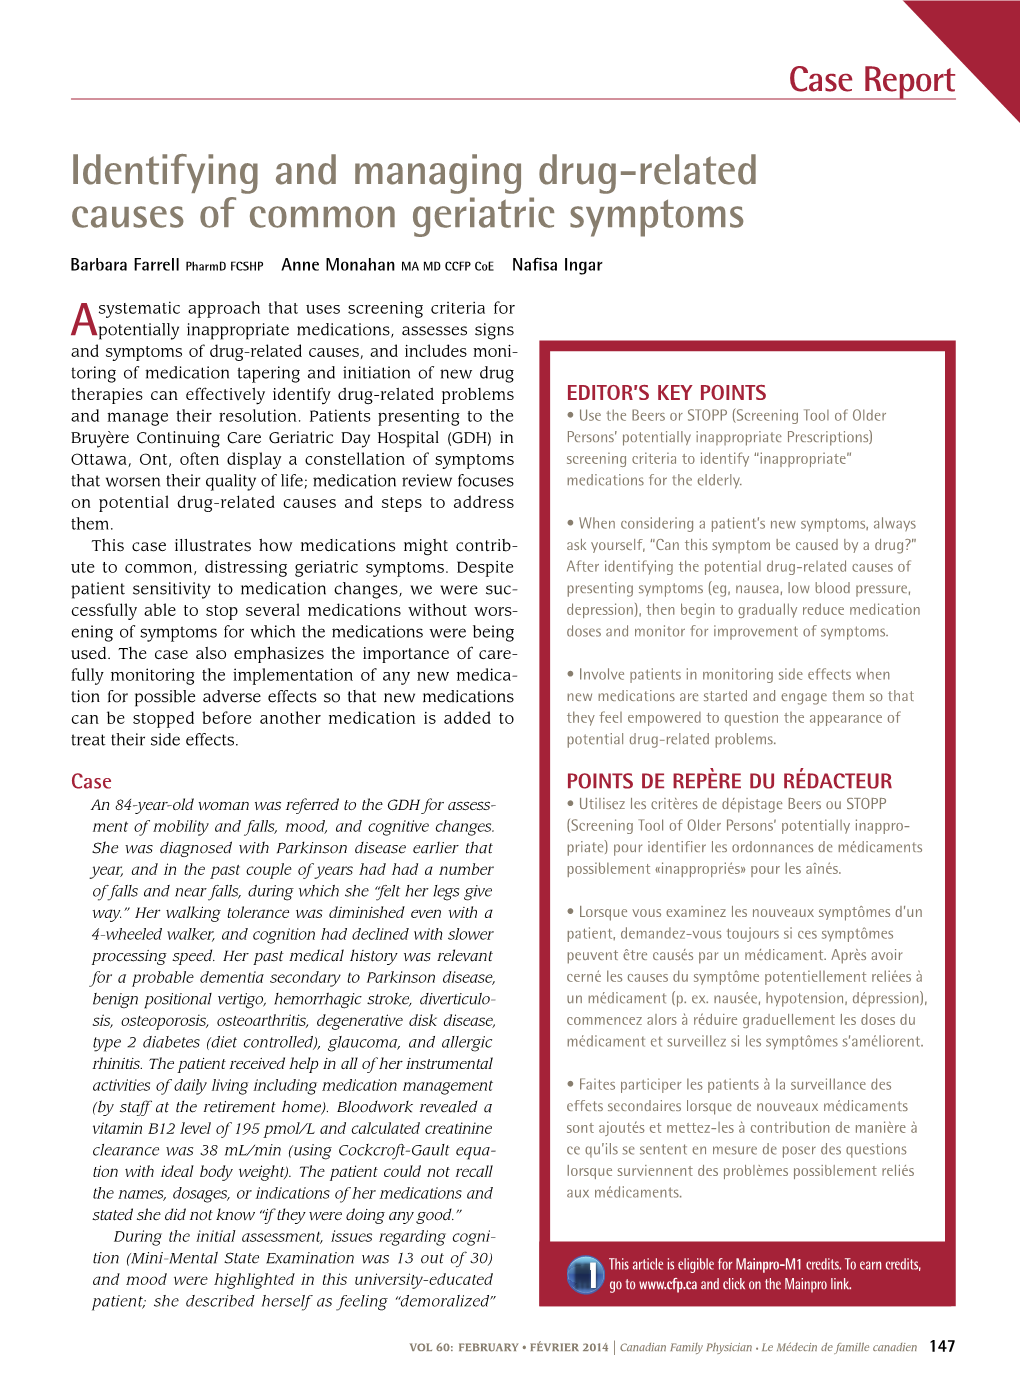 Identifying and Managing Drug-Related Causes of Common Geriatric Symptoms